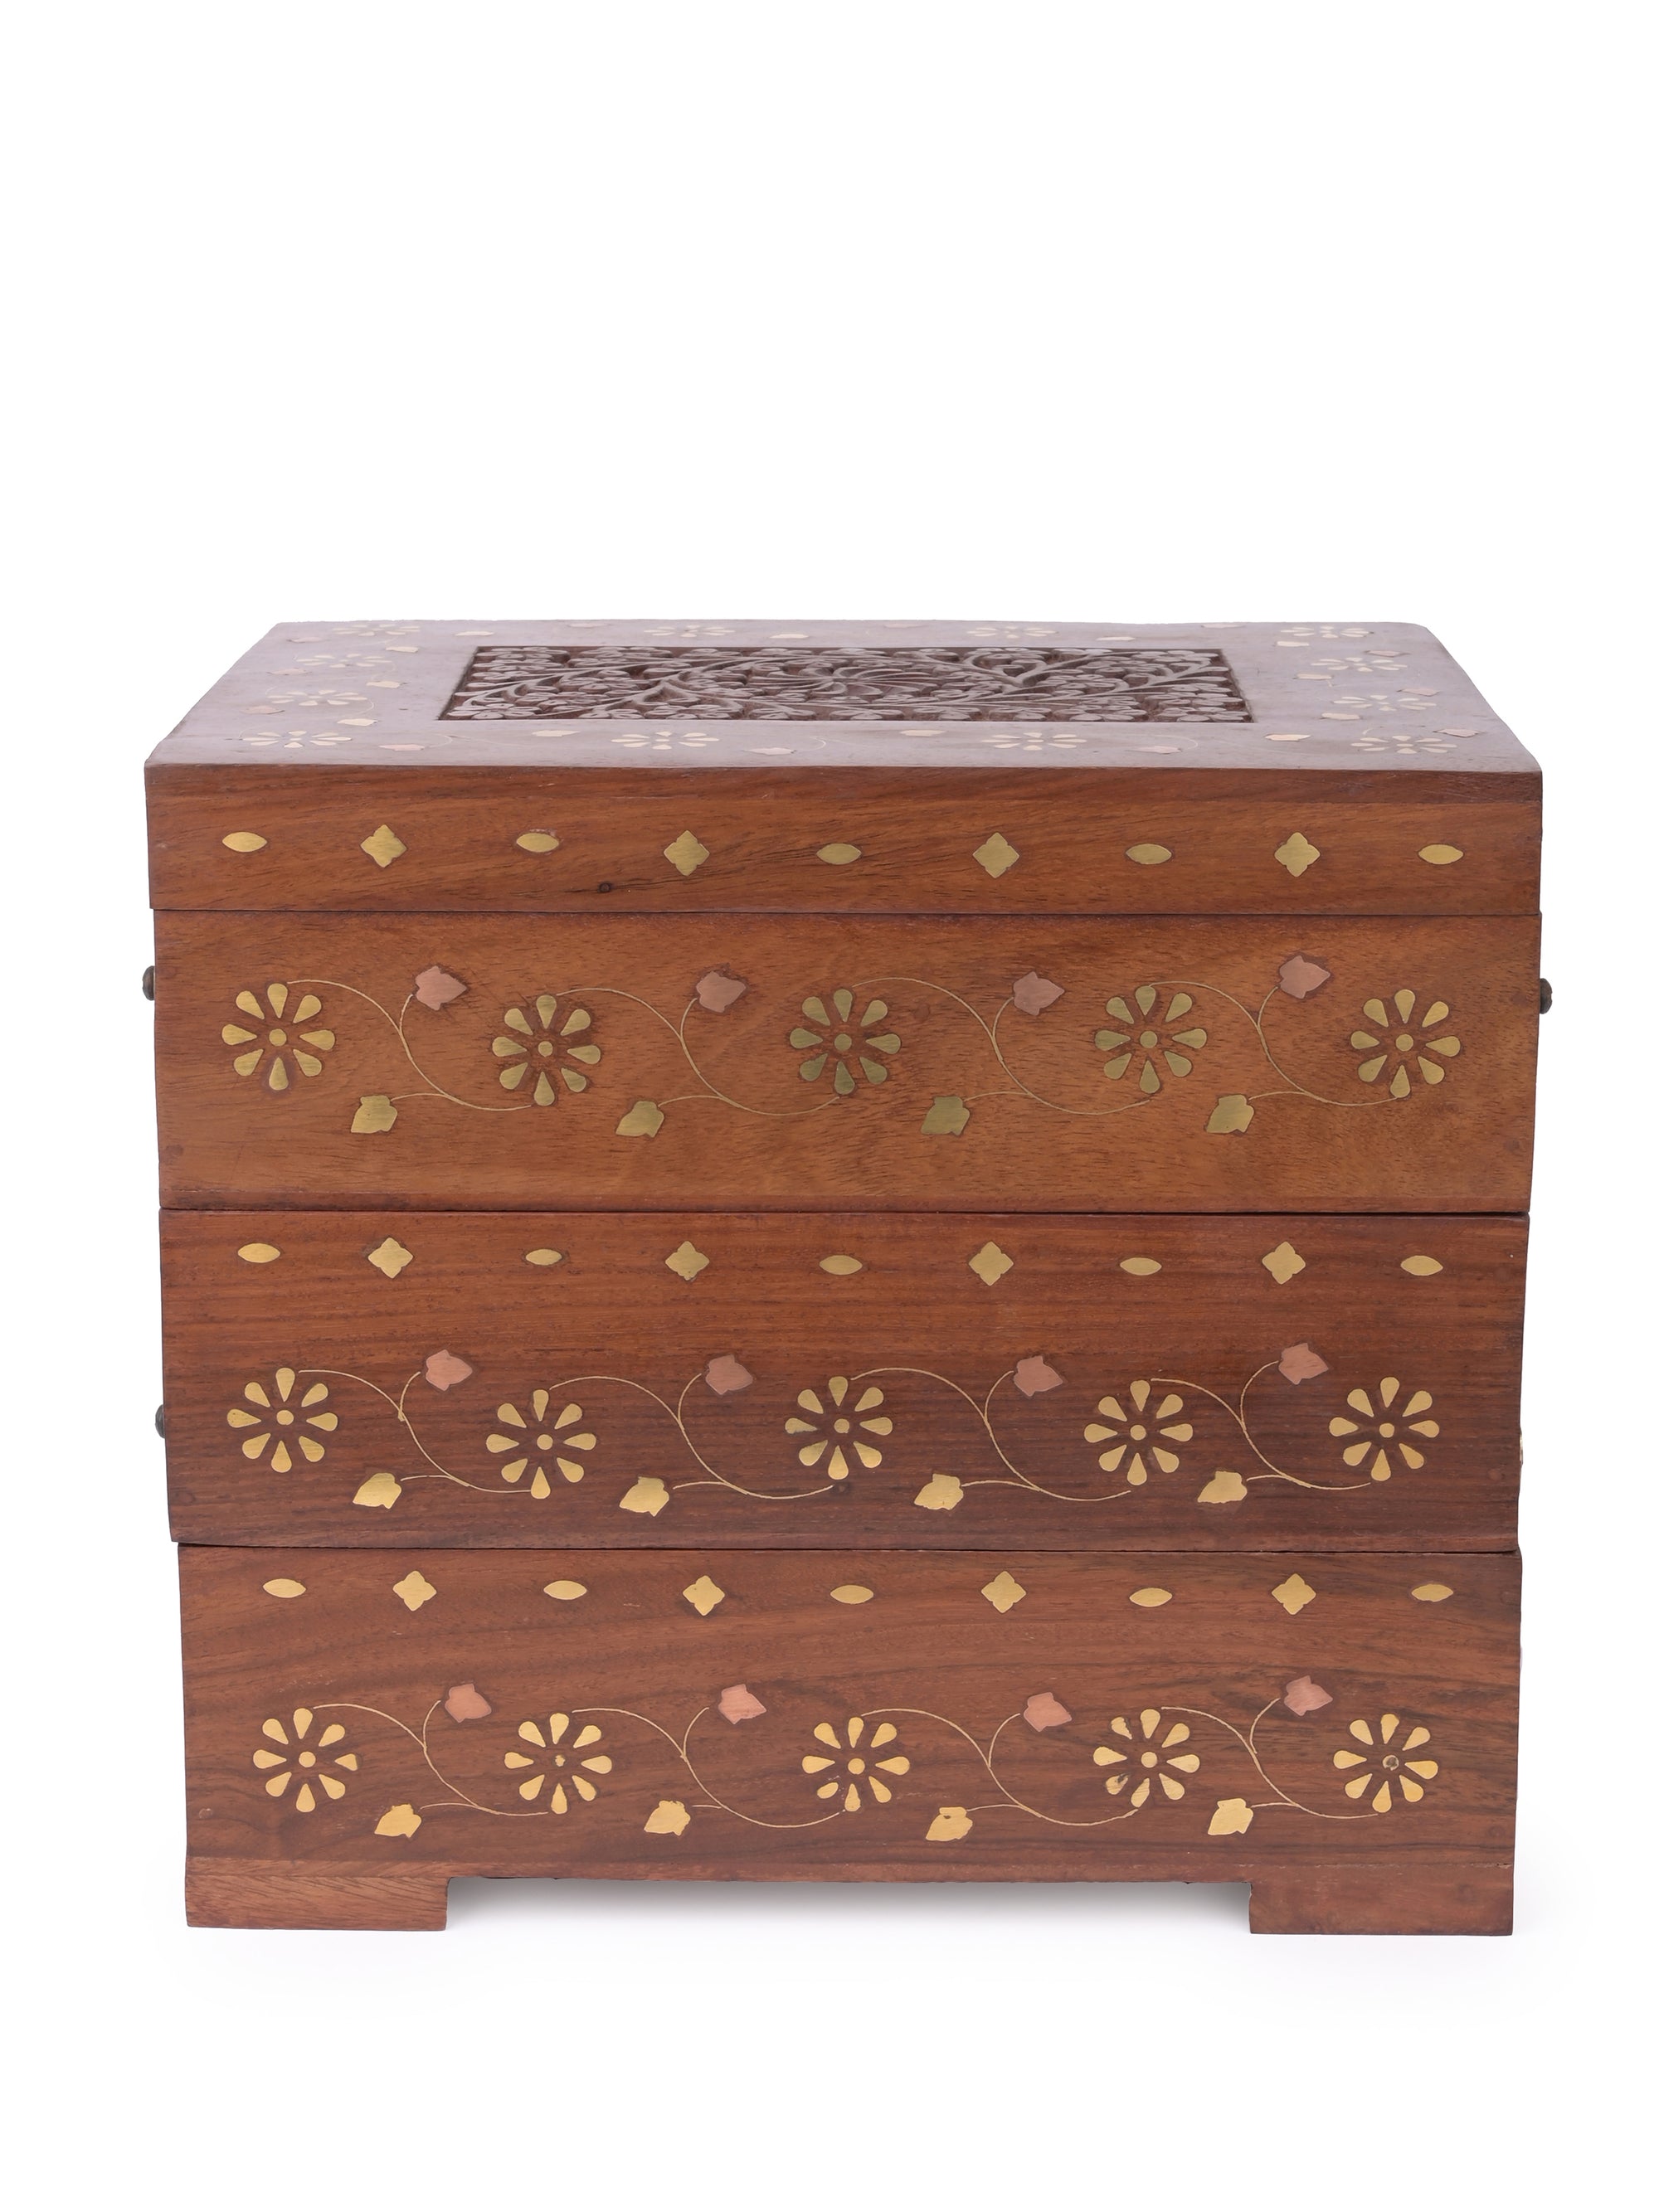 Wood crafted 3 step Storage box for multiple use - The Heritage Artifacts